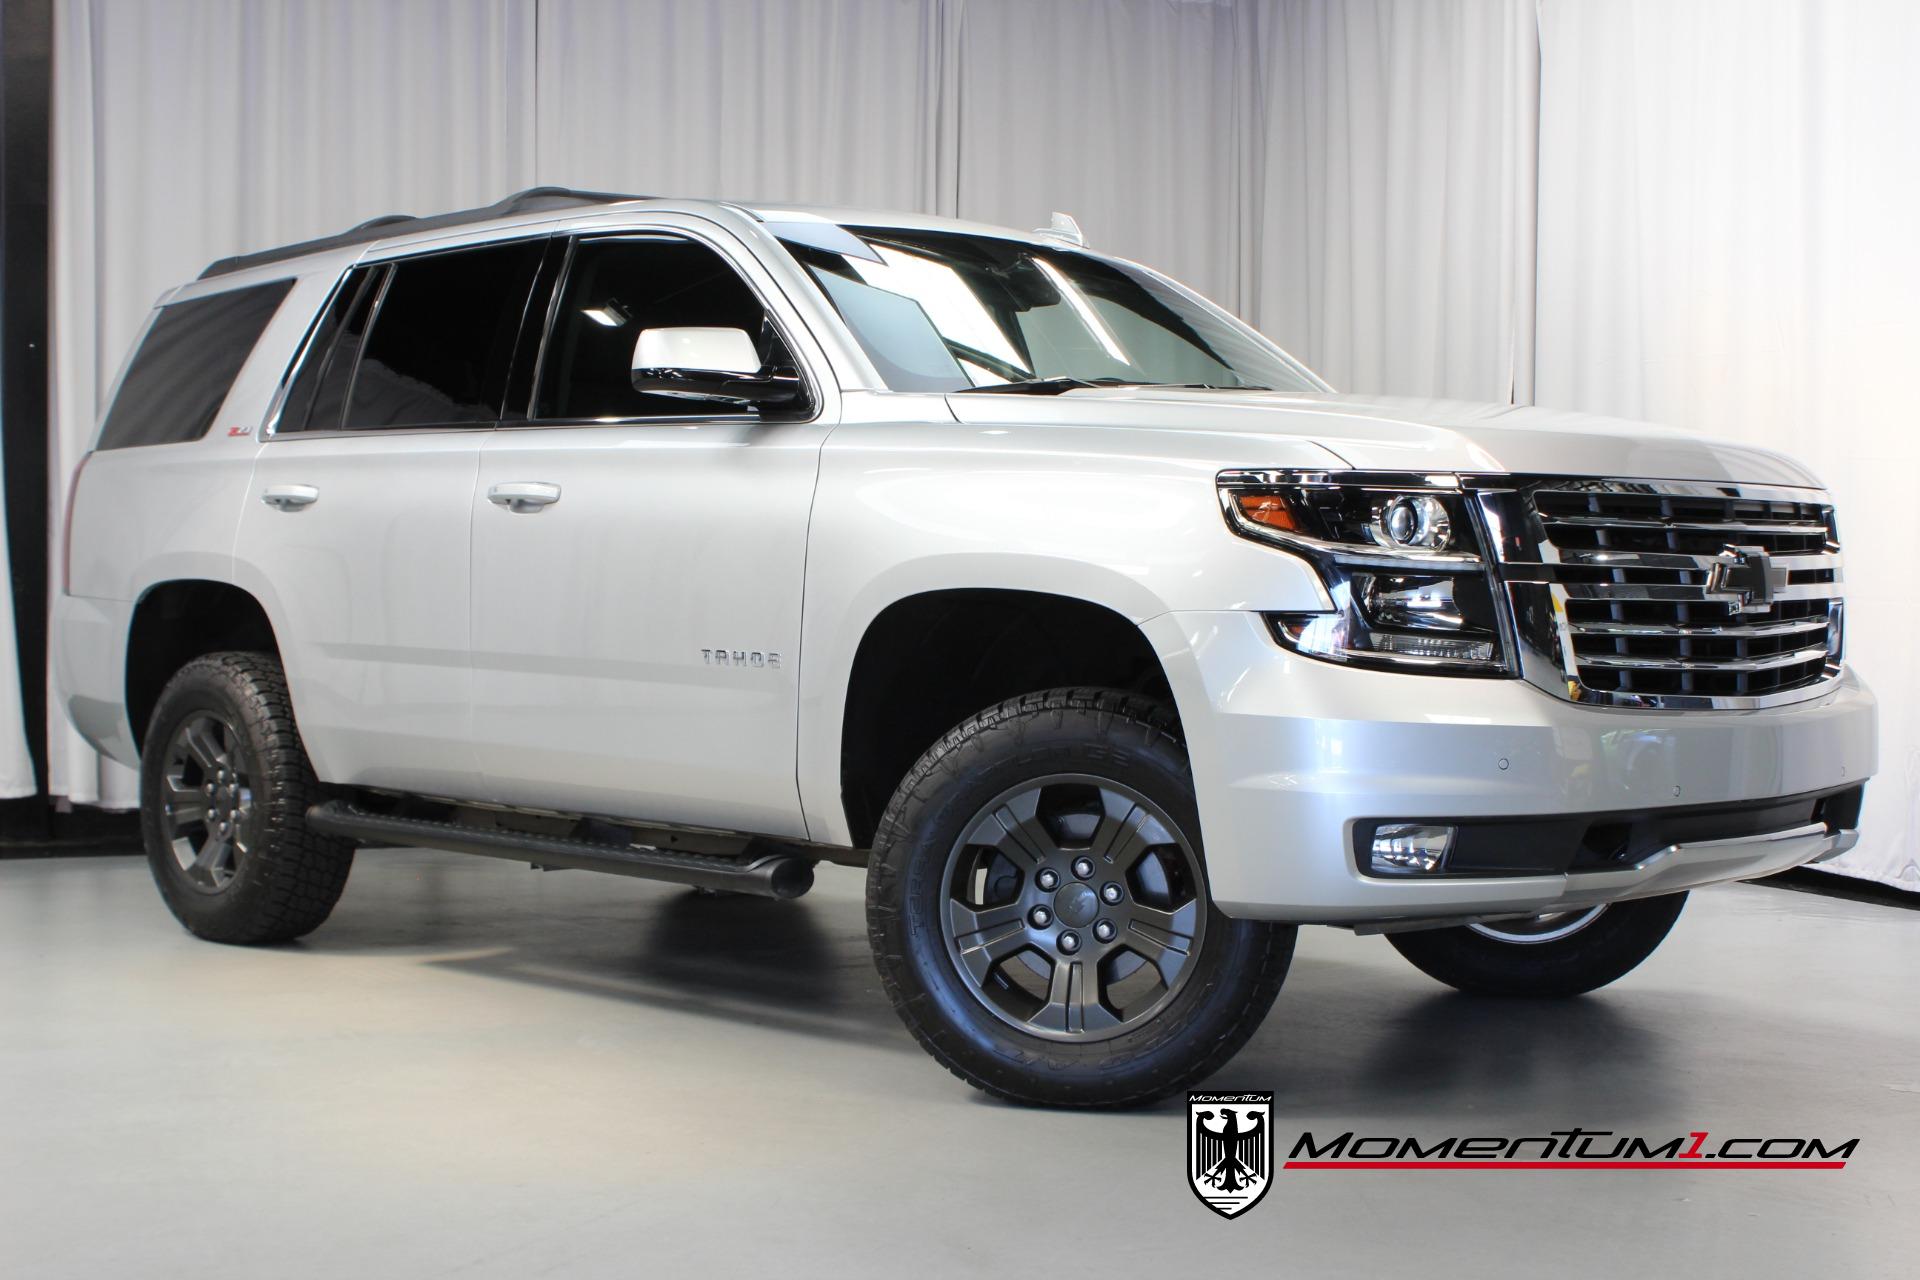 Used 2020 Chevrolet Tahoe Z71 Luxury Package For Sale (Sold) Momentum